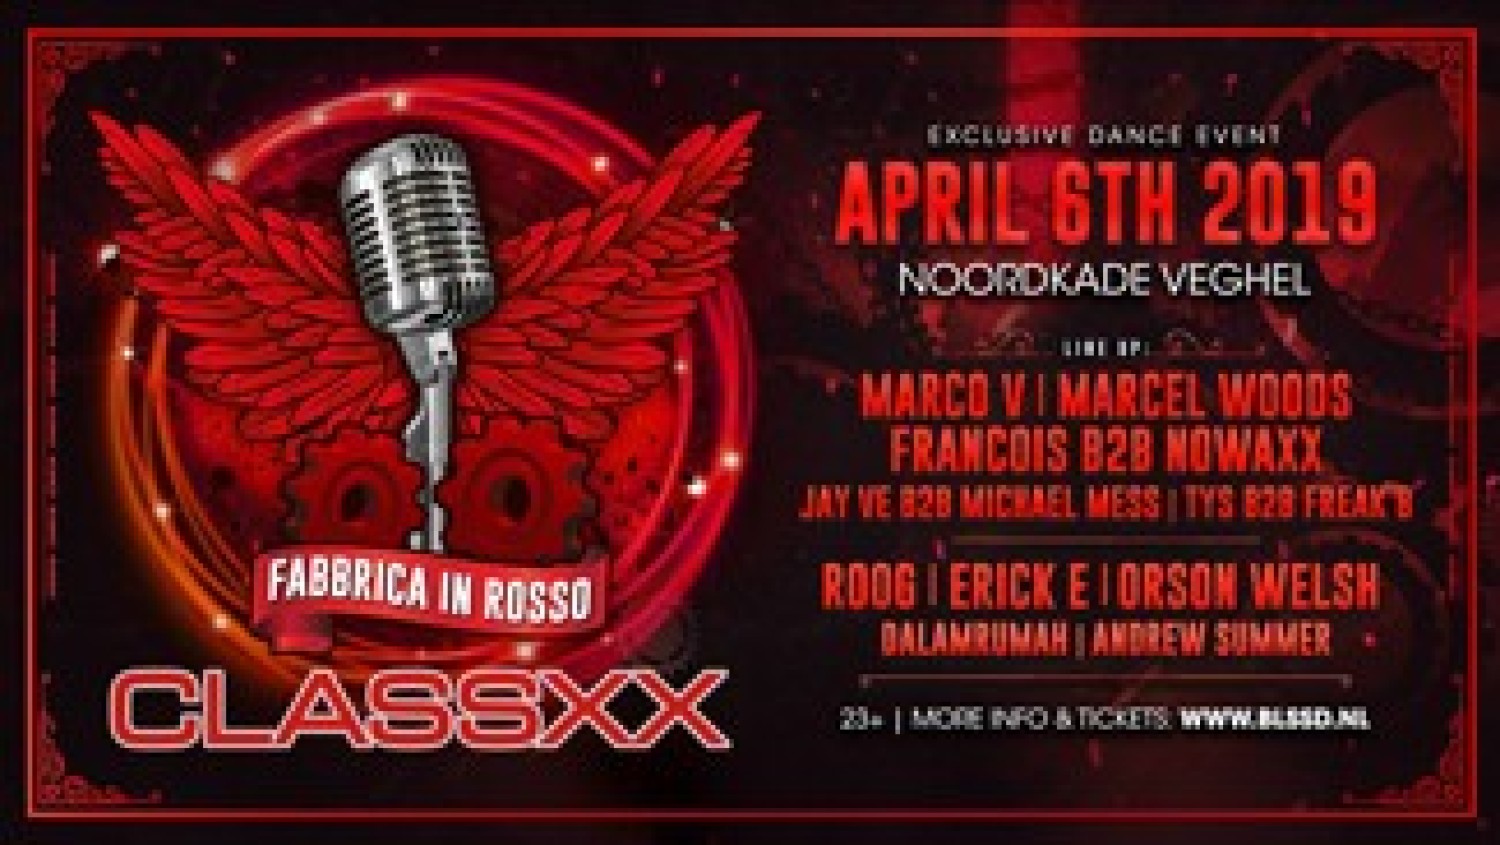 Party nieuws: Timetable Fabbrica in Rosso is bekend!